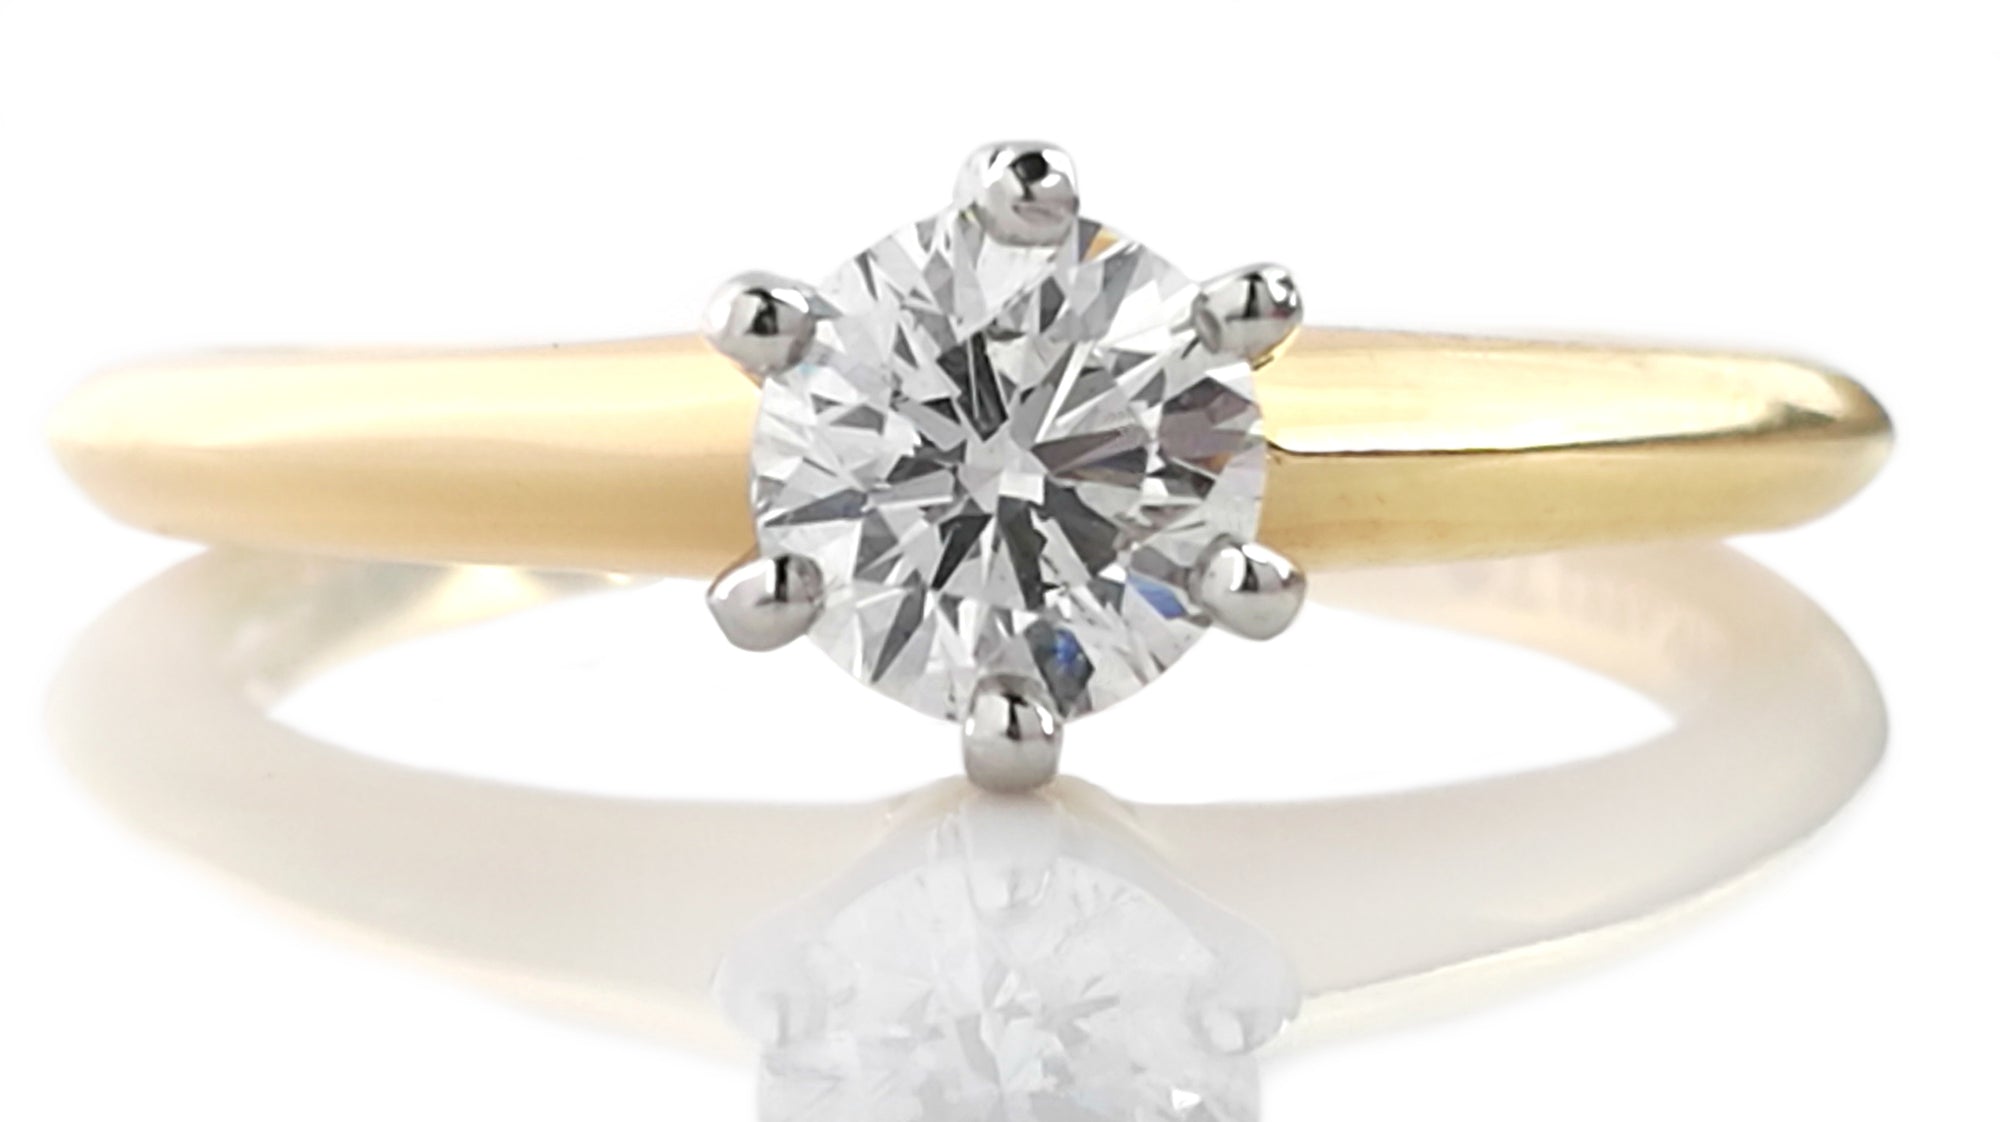 Tiffany & Co. 0.43ct G/VS Round Brilliant Diamond Engagement Ring in 18k Yellow Gold